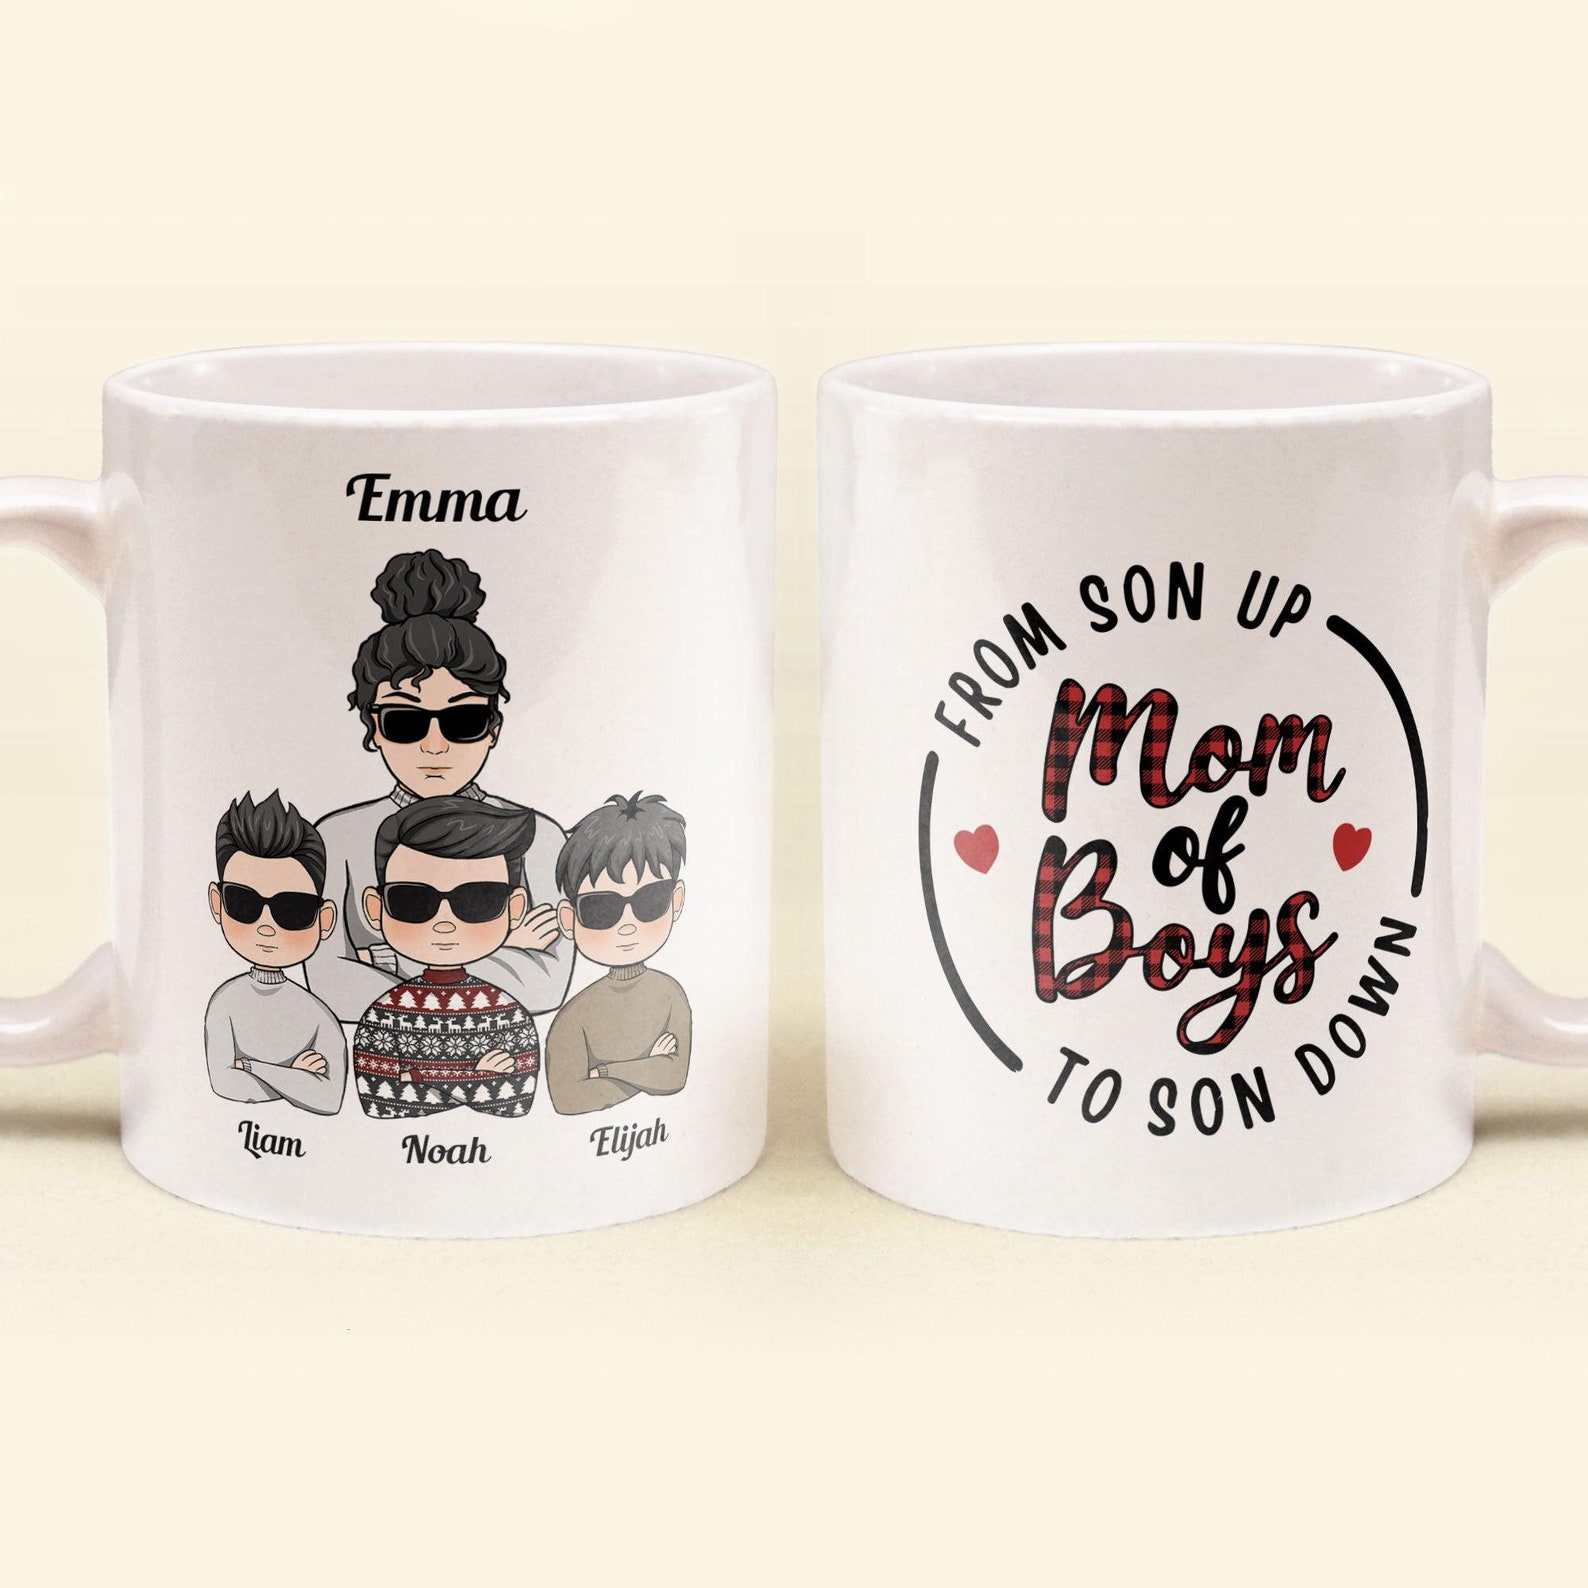 The ceramic mug with a cute cartoon print of your mother and her children is a truly adorable gift.